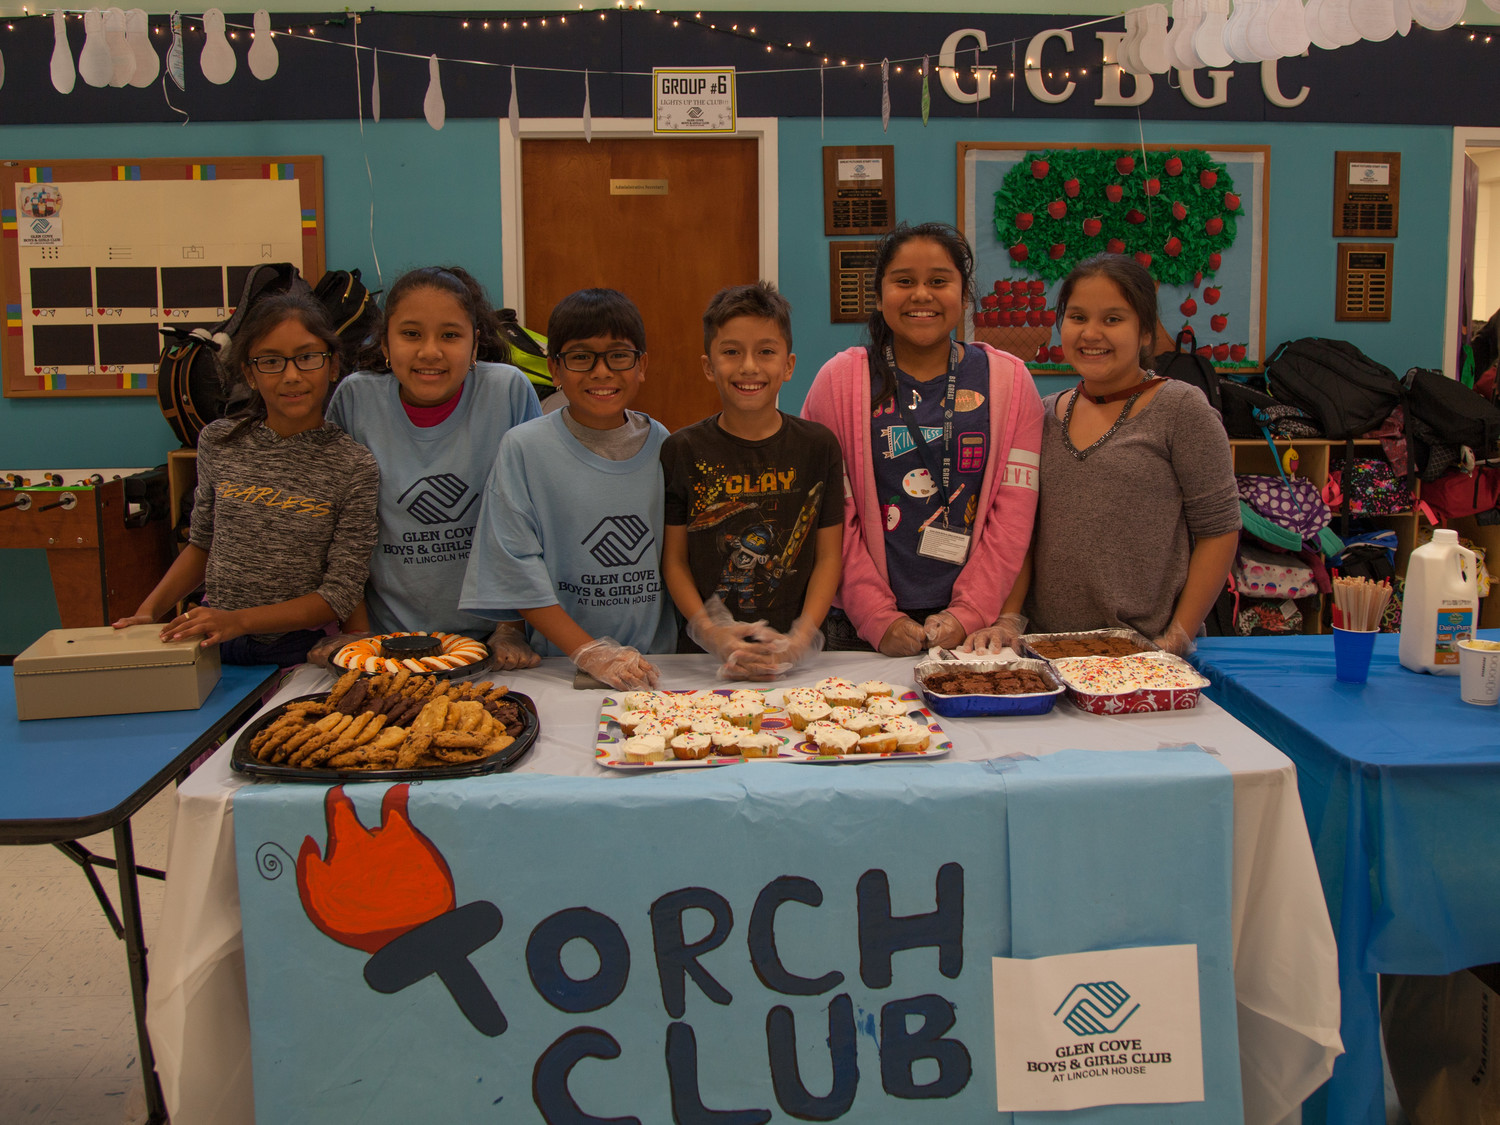 Angie Mendoza, left, Yesica Valladares, Daniel Hernandez, Jabier Escobar, Yamna Vigil, and Ashley Najarro sold baked goods for the GCB&GC’s Torch Club at the Lights on Afterschool.